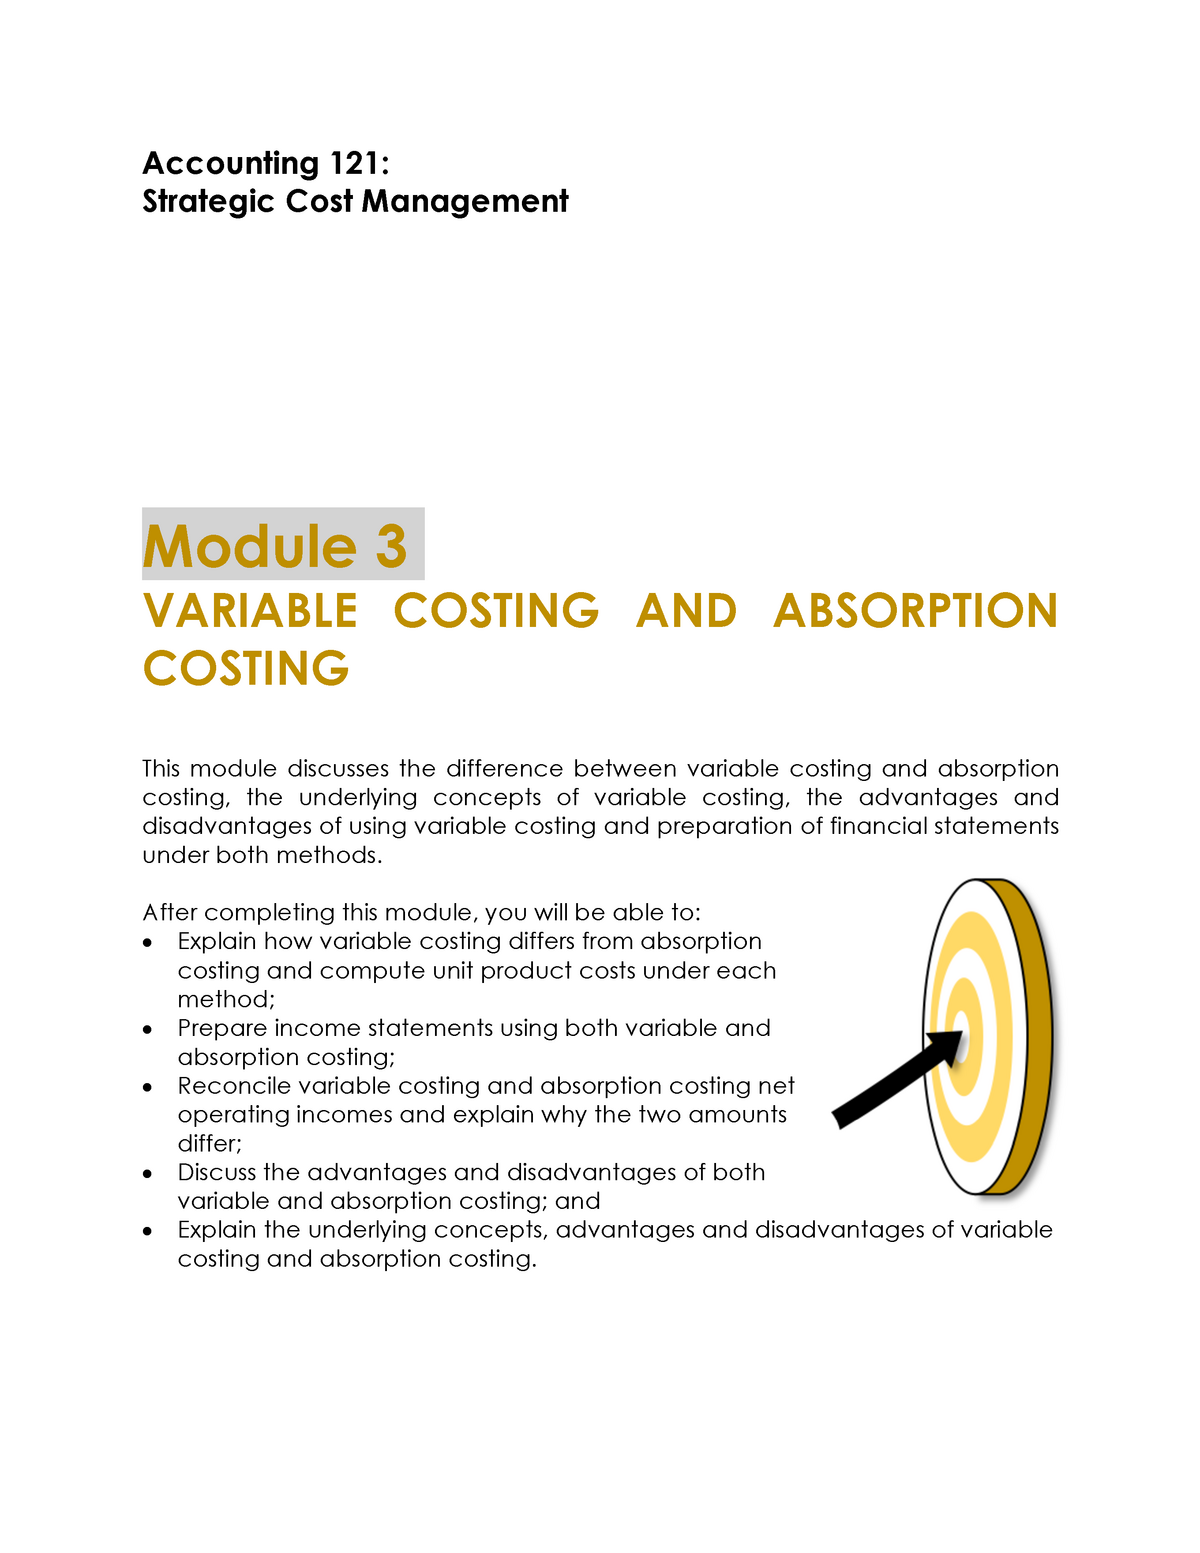 disadvantages of variable costing